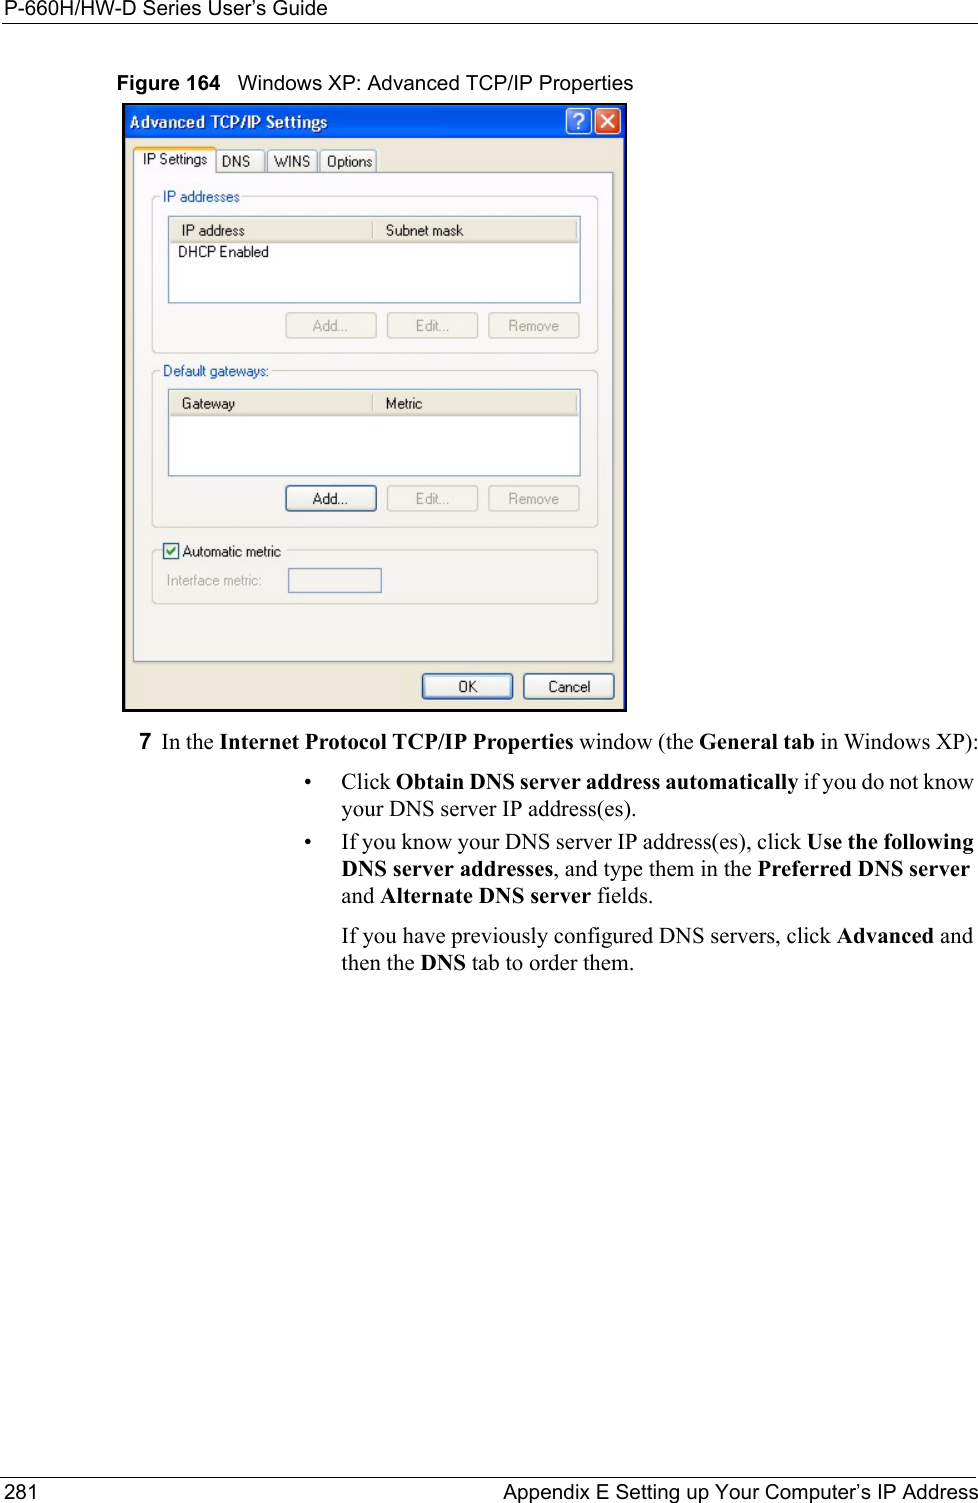 P-660H/HW-D Series User’s Guide281 Appendix E Setting up Your Computer’s IP AddressFigure 164   Windows XP: Advanced TCP/IP Properties7In the Internet Protocol TCP/IP Properties window (the General tab in Windows XP):• Click Obtain DNS server address automatically if you do not know your DNS server IP address(es).• If you know your DNS server IP address(es), click Use the following DNS server addresses, and type them in the Preferred DNS server and Alternate DNS server fields. If you have previously configured DNS servers, click Advanced and then the DNS tab to order them.